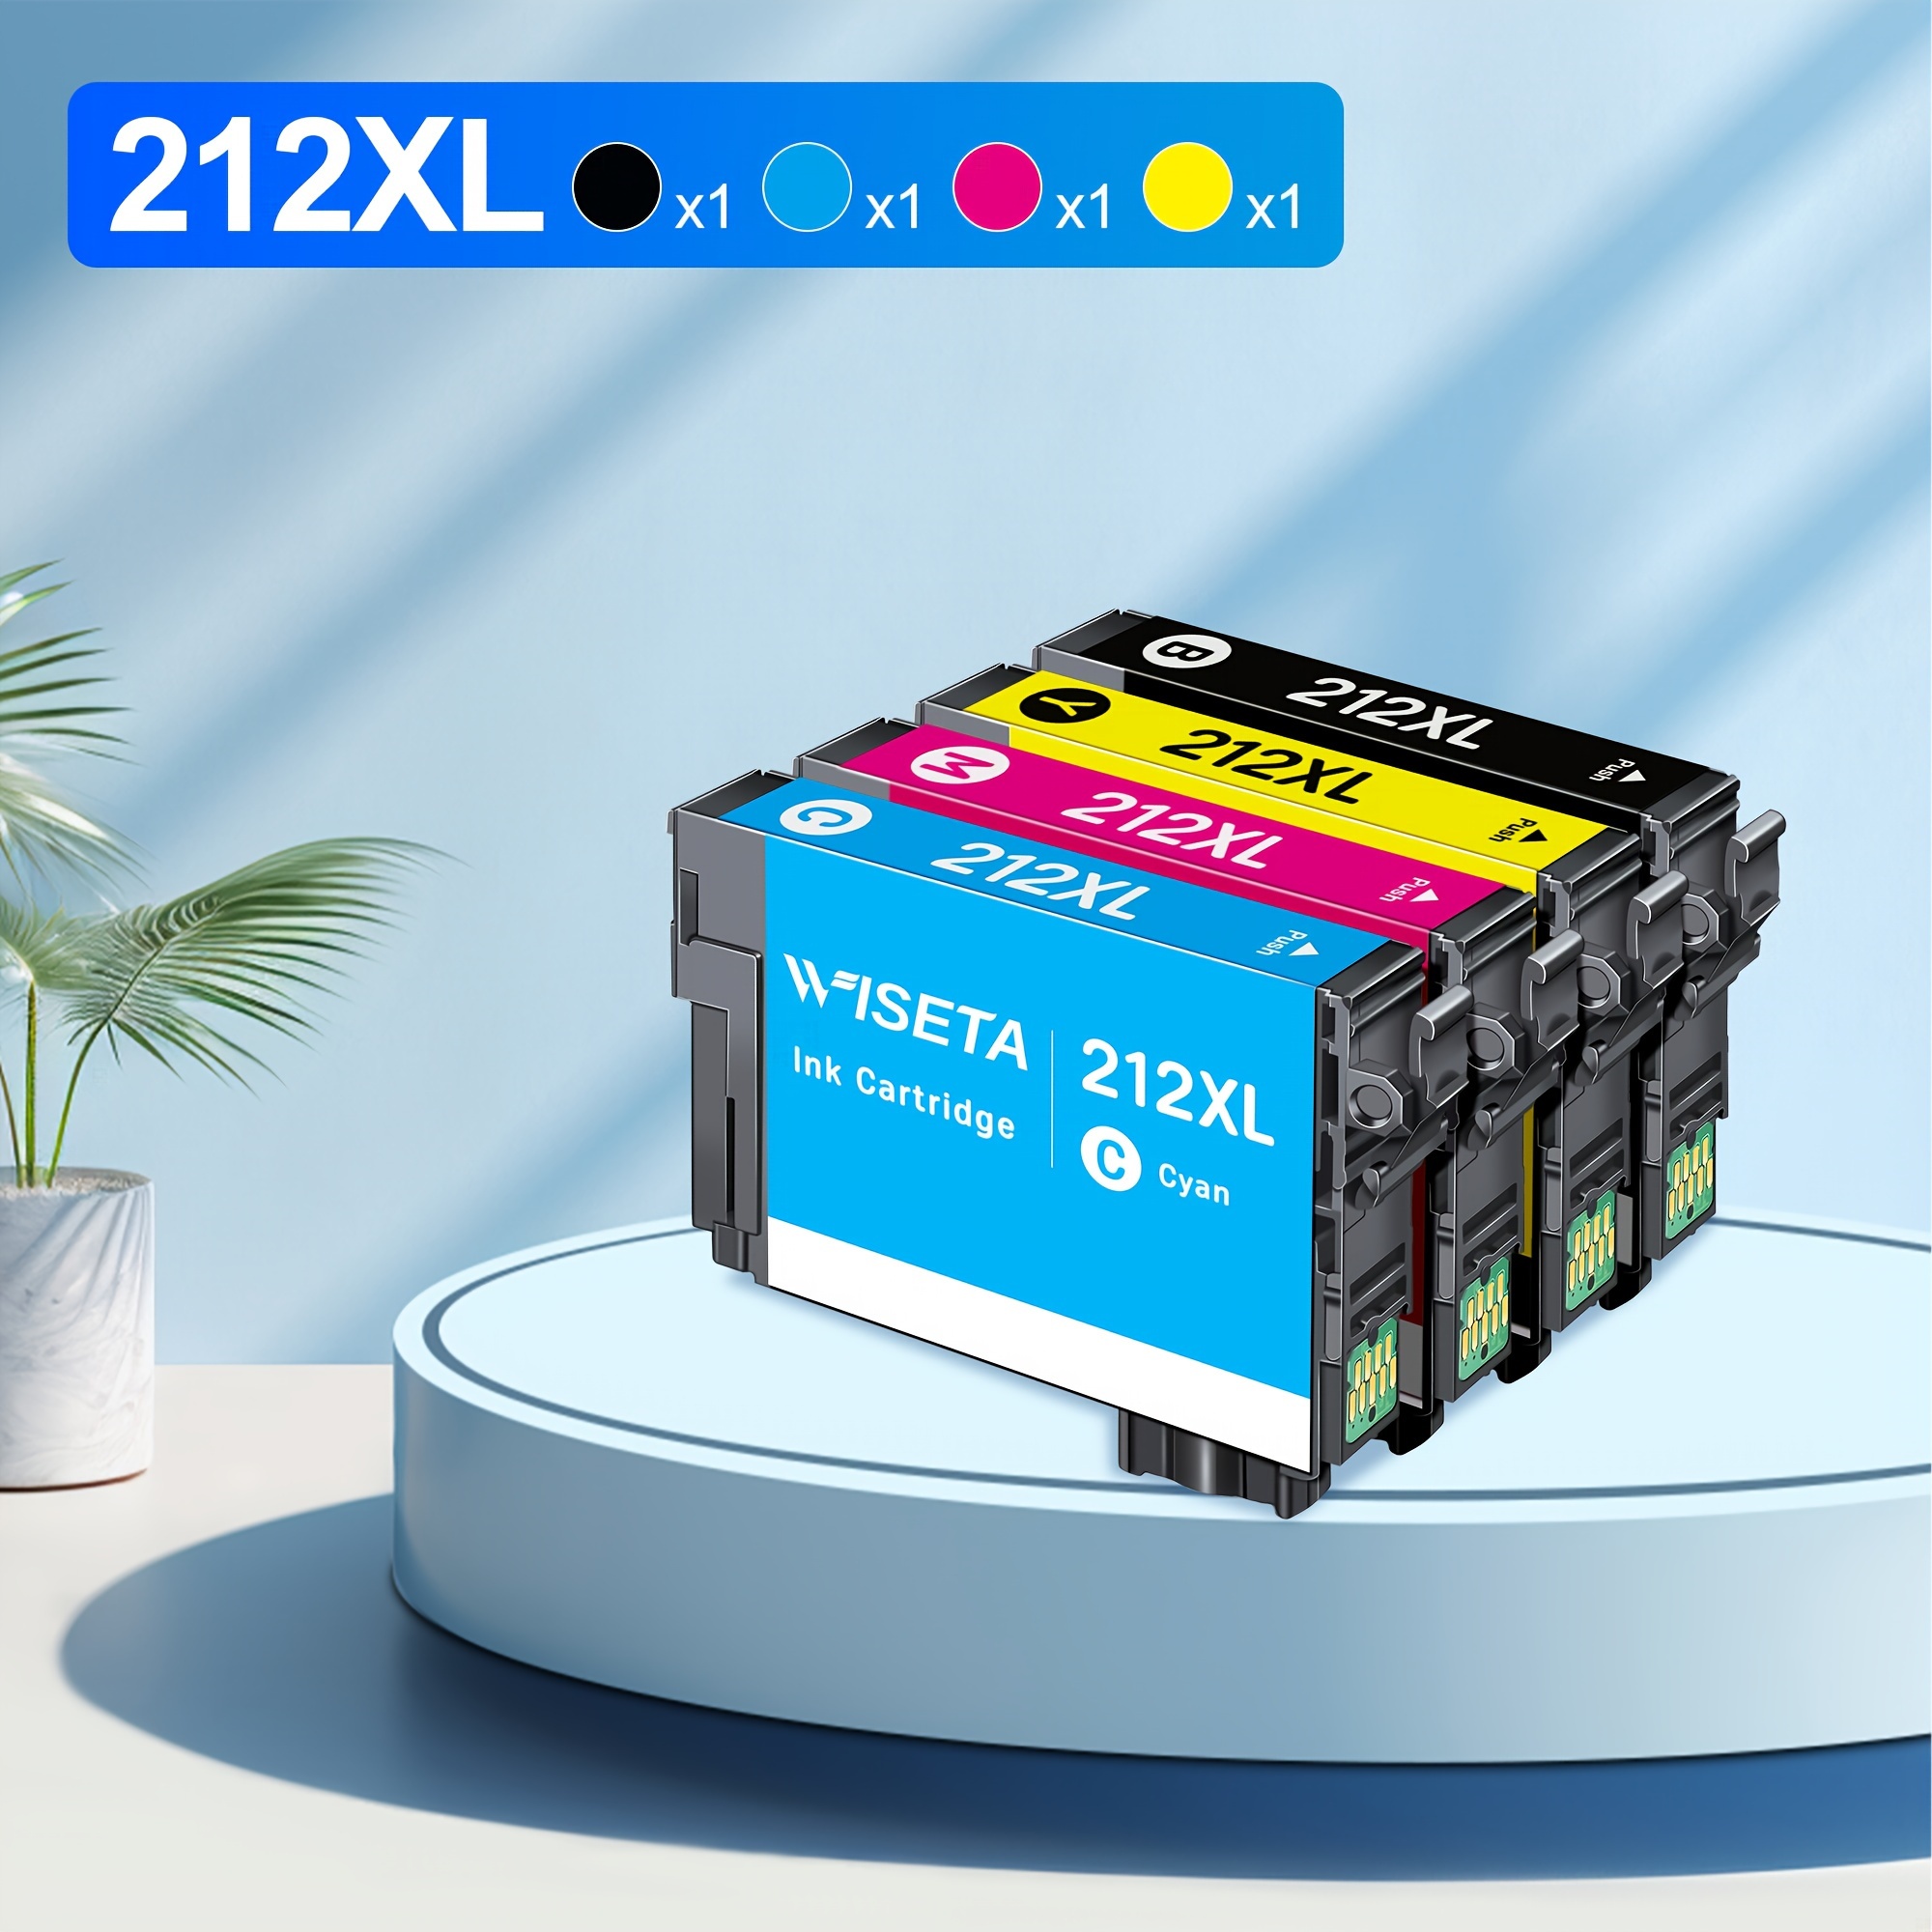 

4 Pack 212 Lnk Cartridges Remanufactured Replacement For Epson 212 Ink Cartridges Combo Pack T212 T212xl To Use With Expression Home Xp-4100 Xp-4105 Workforce Wf-2830 Wf-2850 Printer